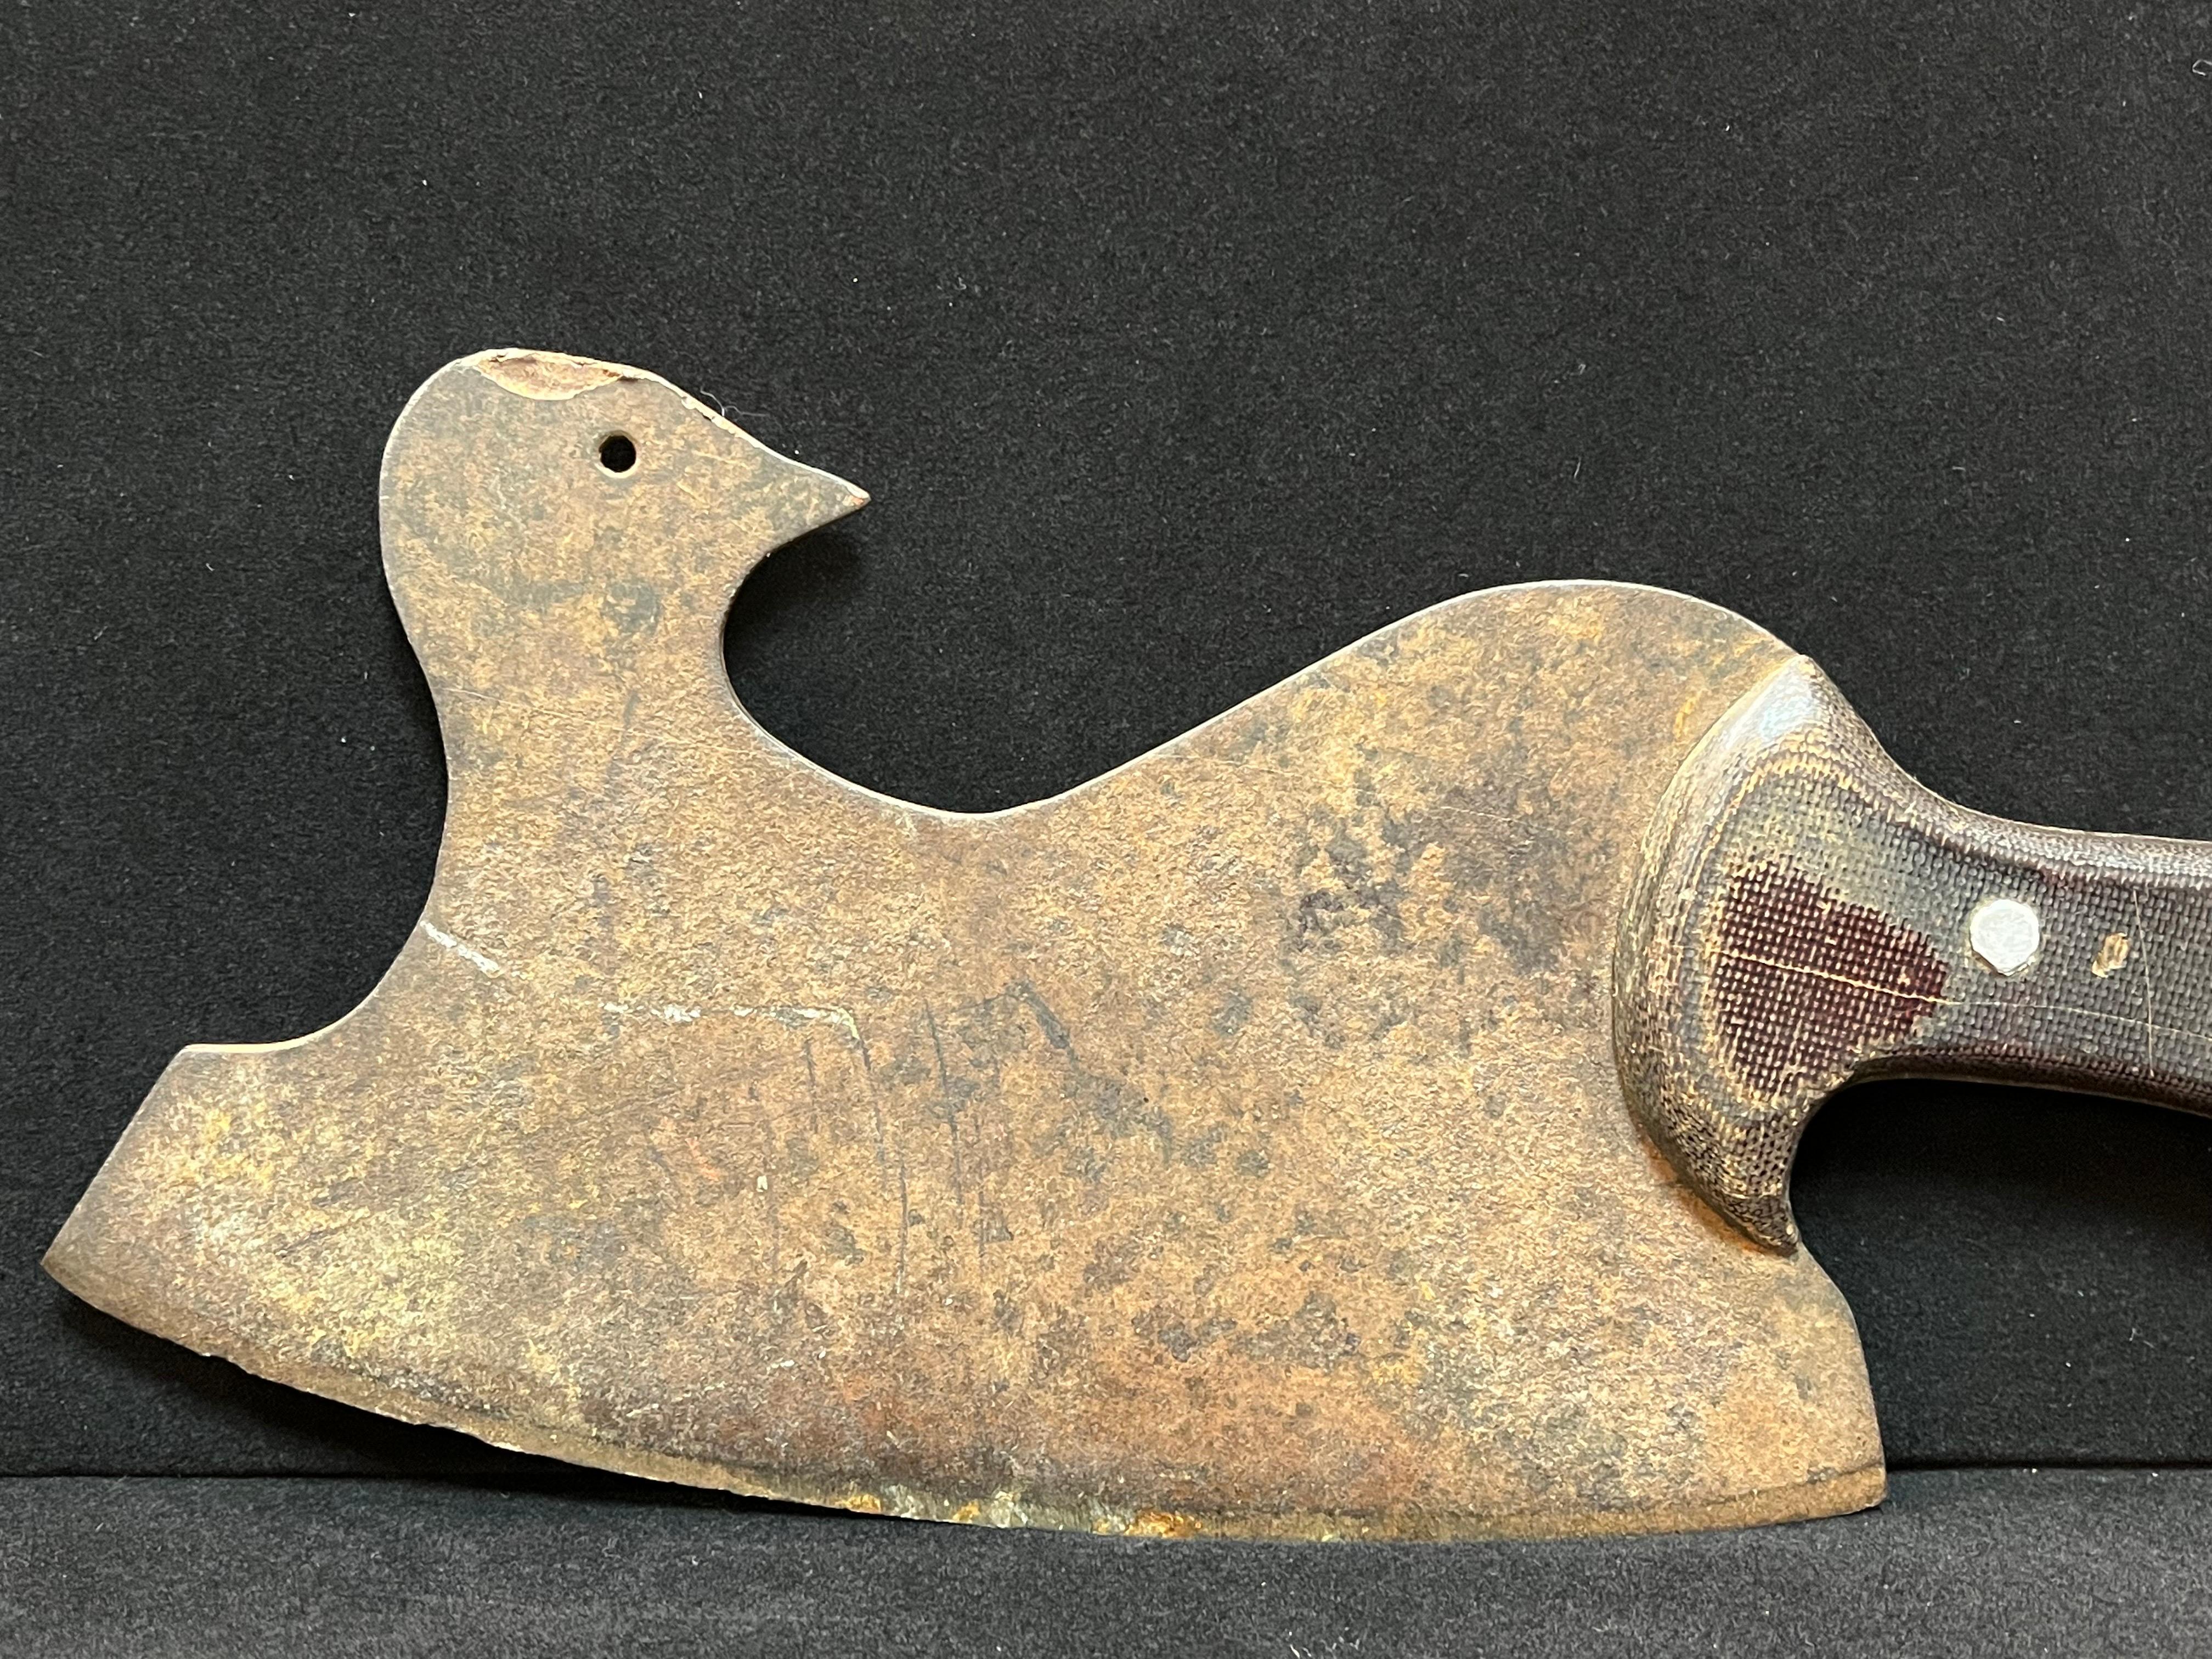 An early 20th century French figural butcher's cleaver in the form of a bird. The bird looks back over its shoulder at the chef holding the handle of the cleaver. Perhaps considering what may happen next. The metal blade is formed and shaped,